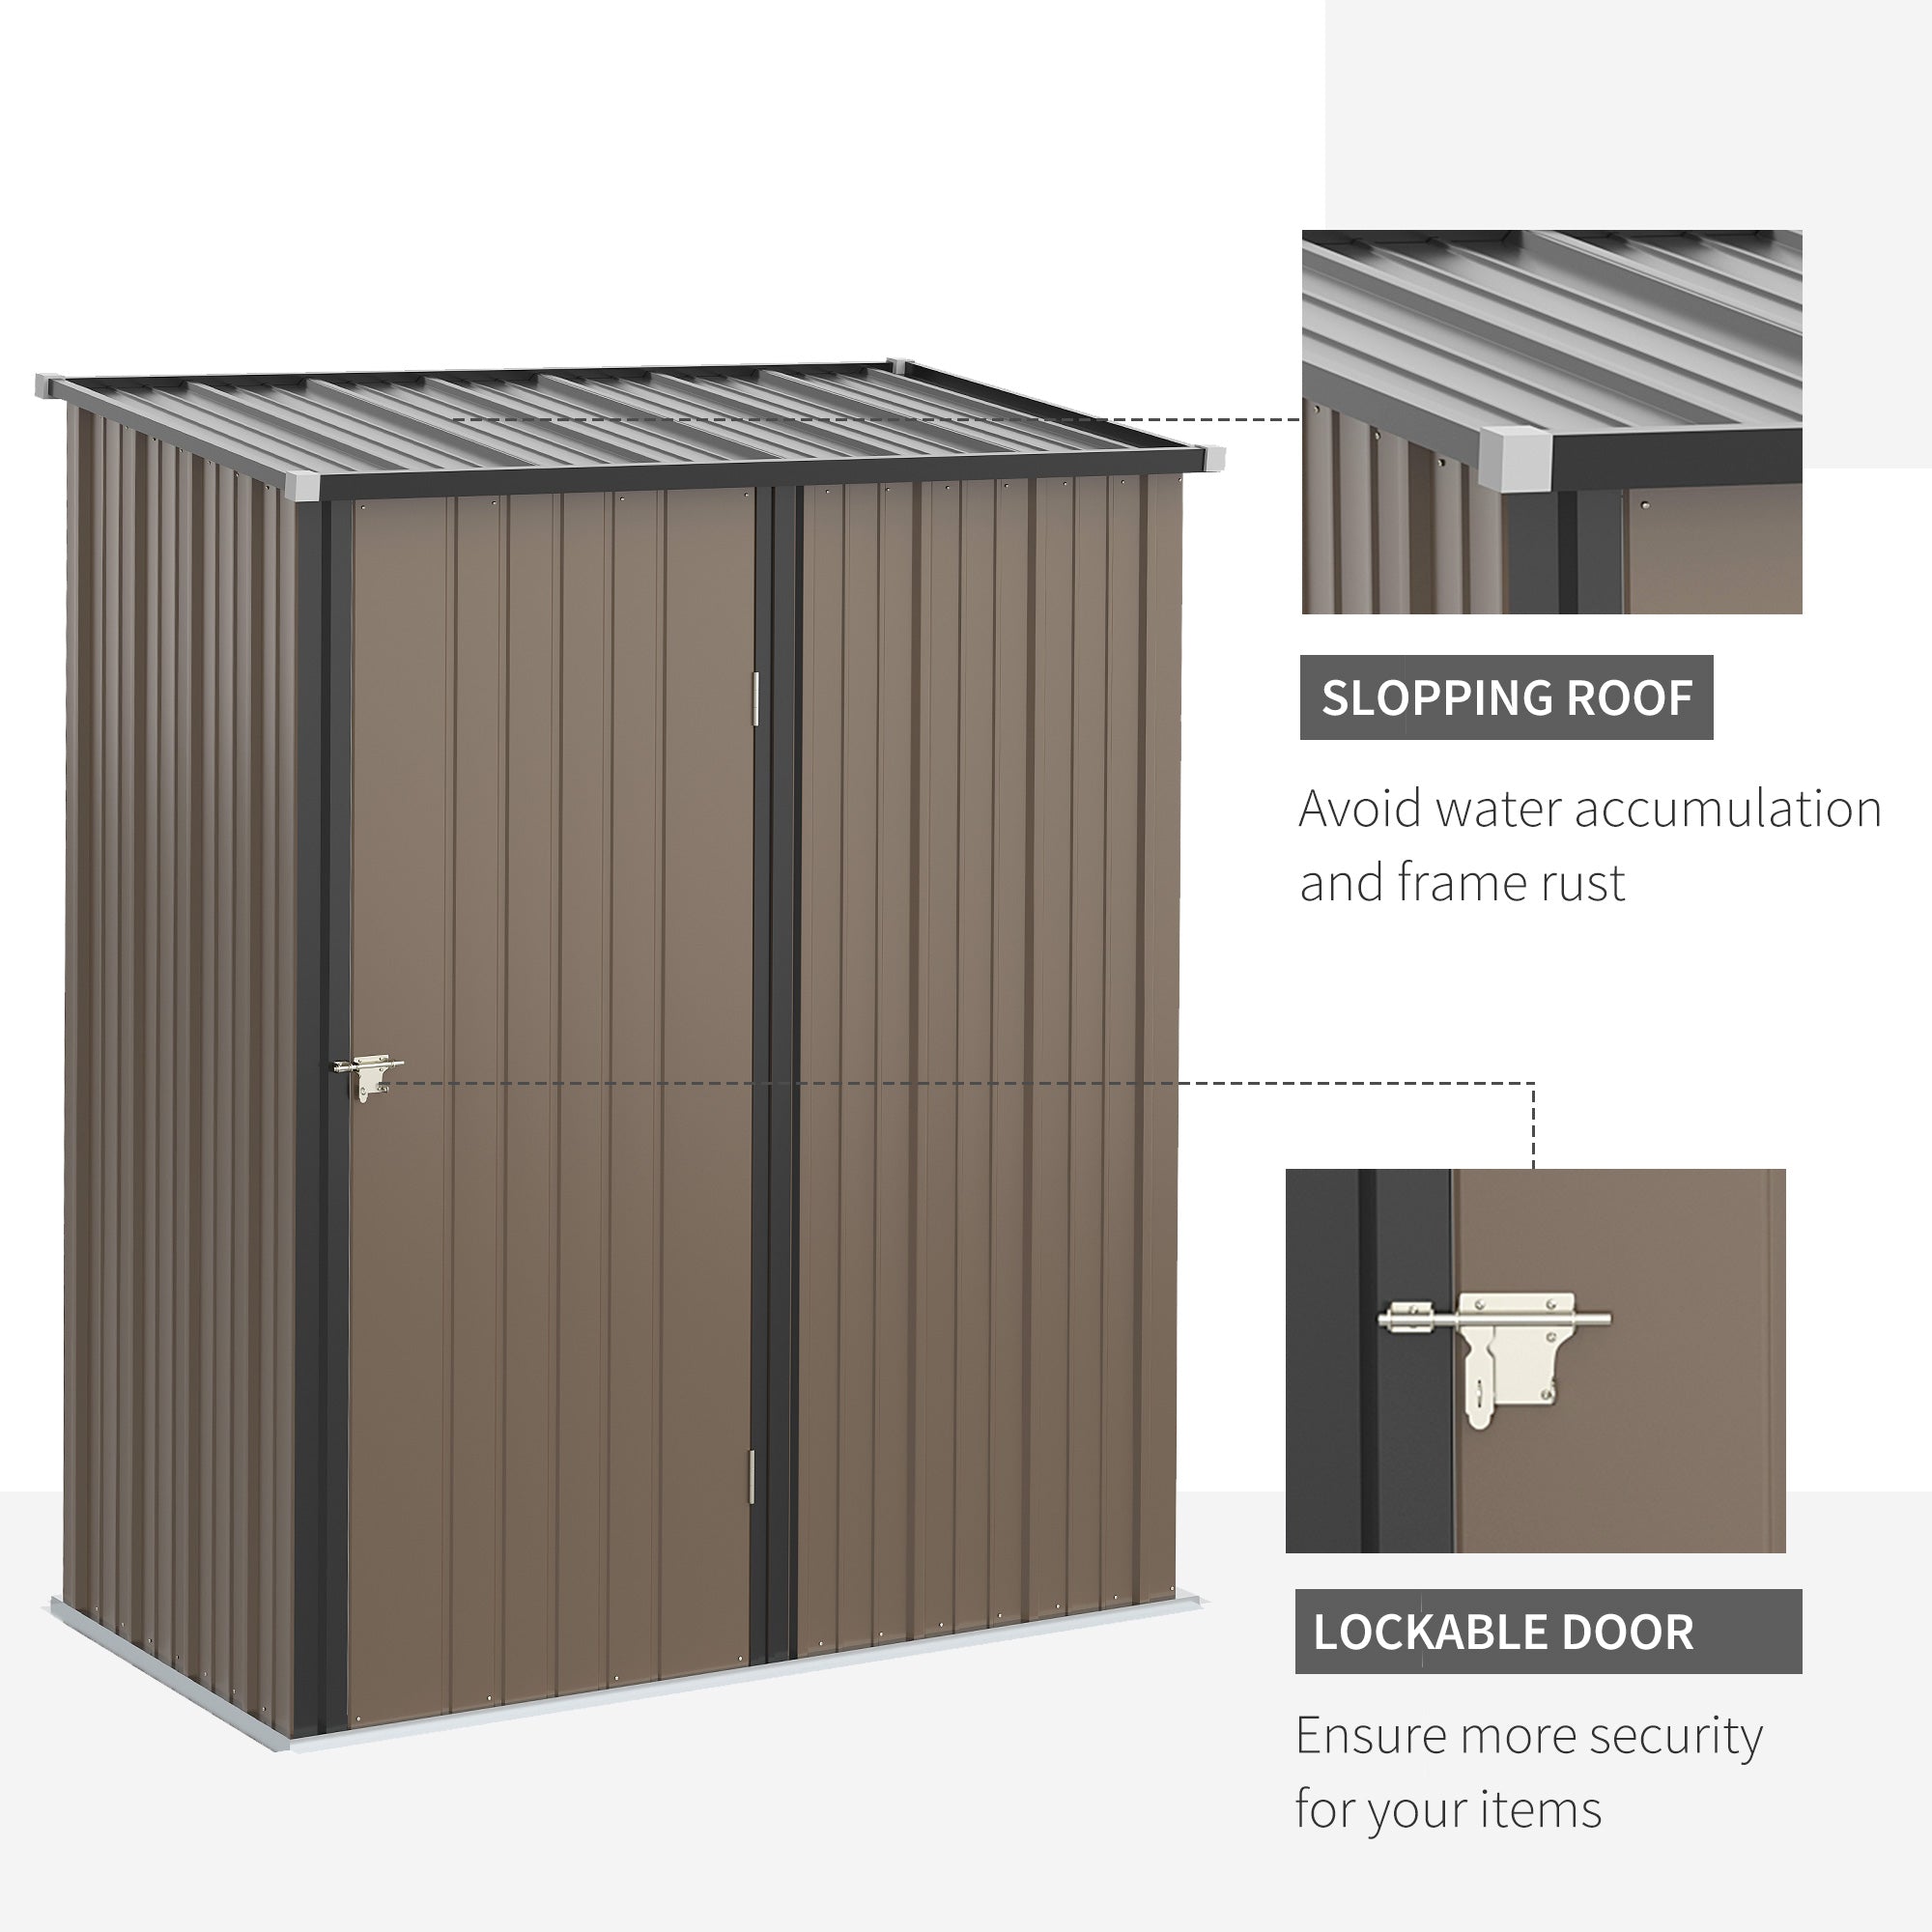 Outsunny 5 x 3 ft Metal Garden Storage Shed Patio Corrugated Steel Roofed Tool Shed with Single Lockable Door, Brown - Inspirely